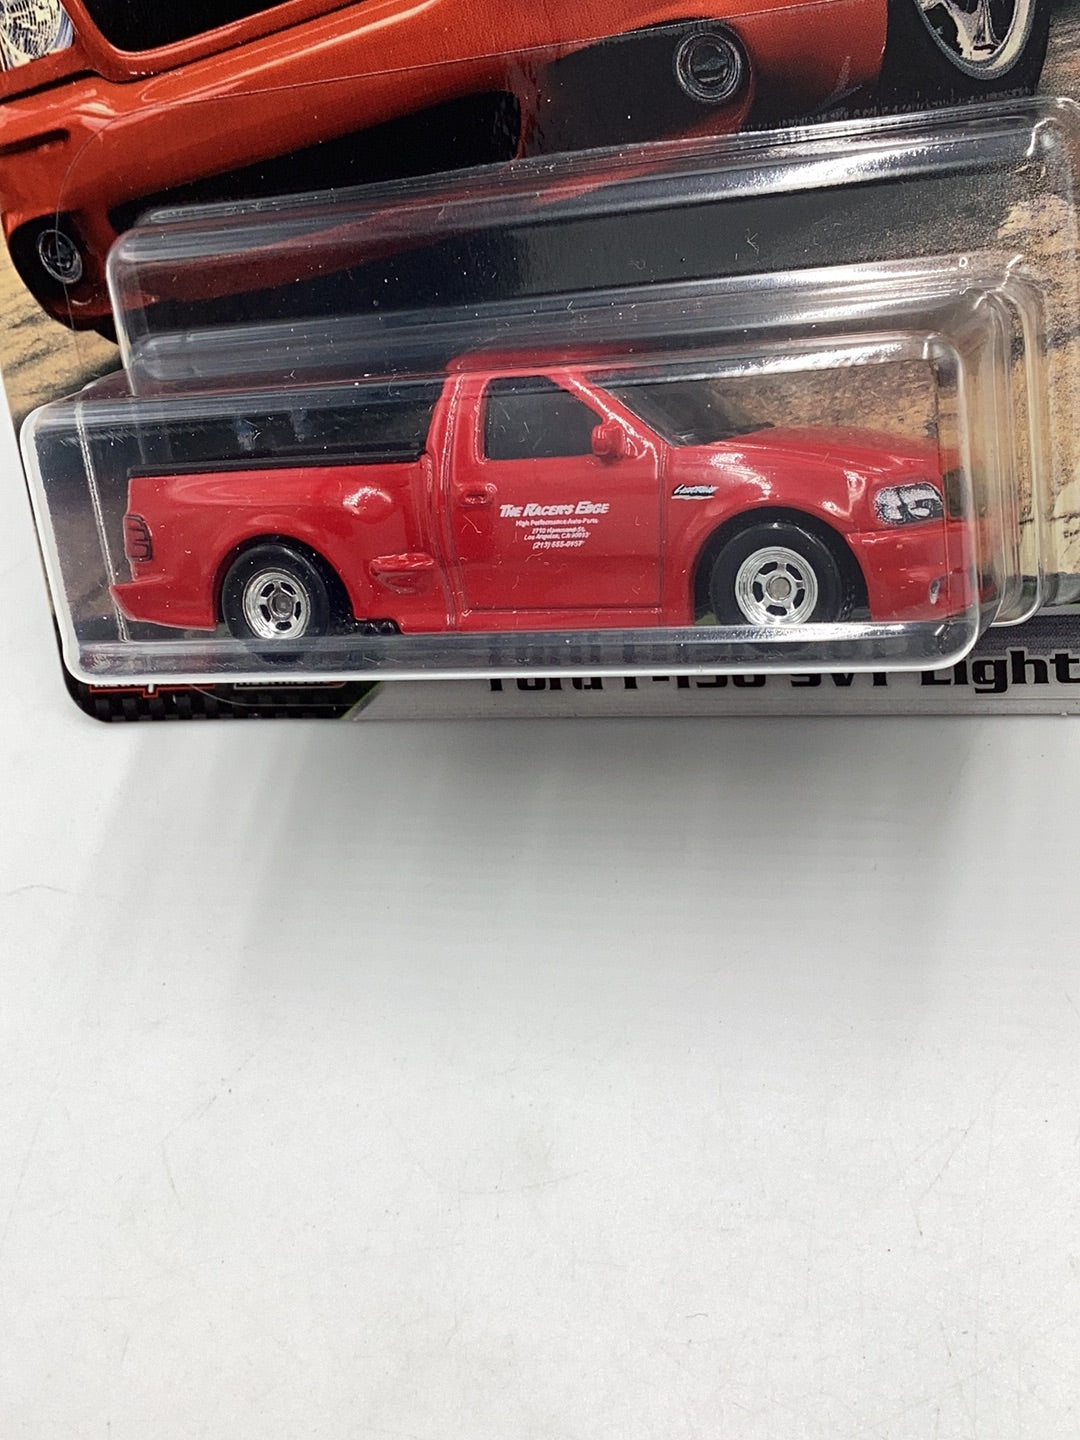 Hot wheels fast and furious Motor City Muscle #1 Ford F-150 SVT Lightning 246G